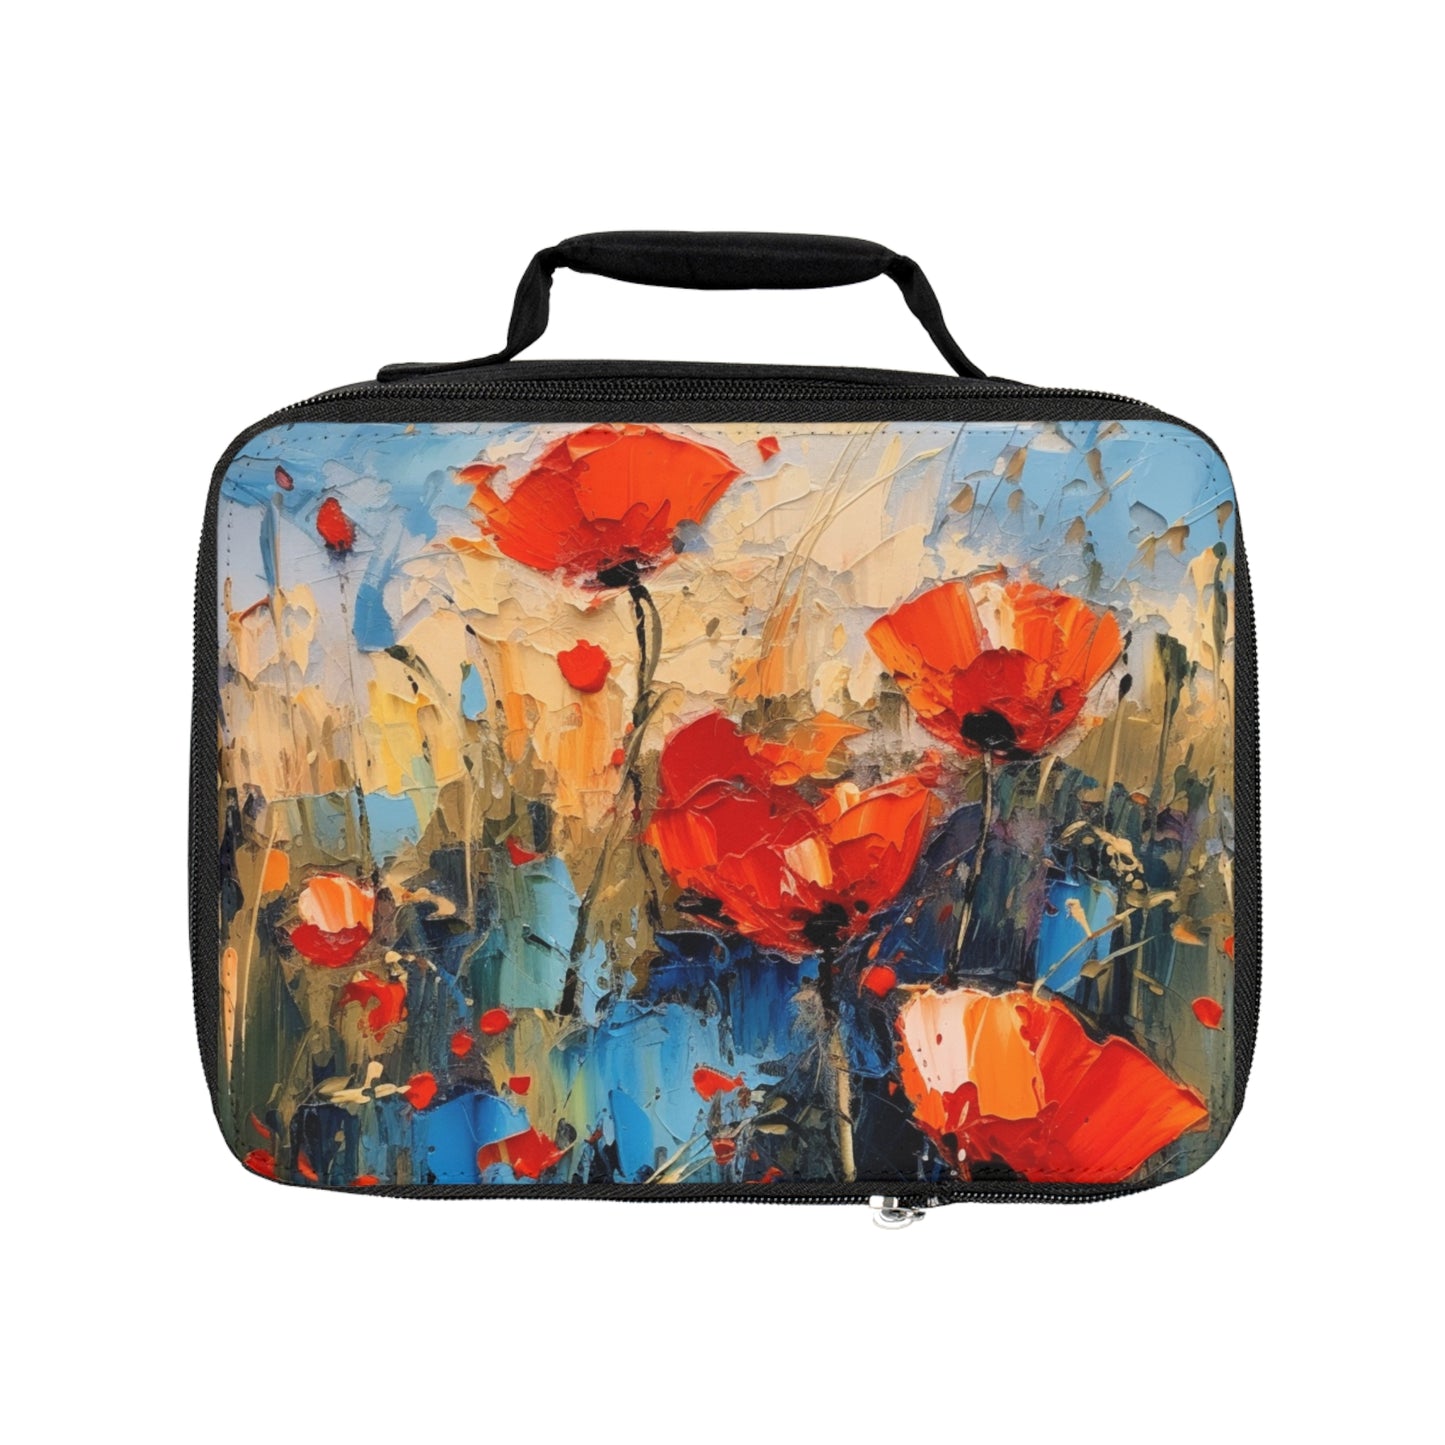 Lunch Bag Paradise: Abstract Poppy Artwork and Flower Drawings